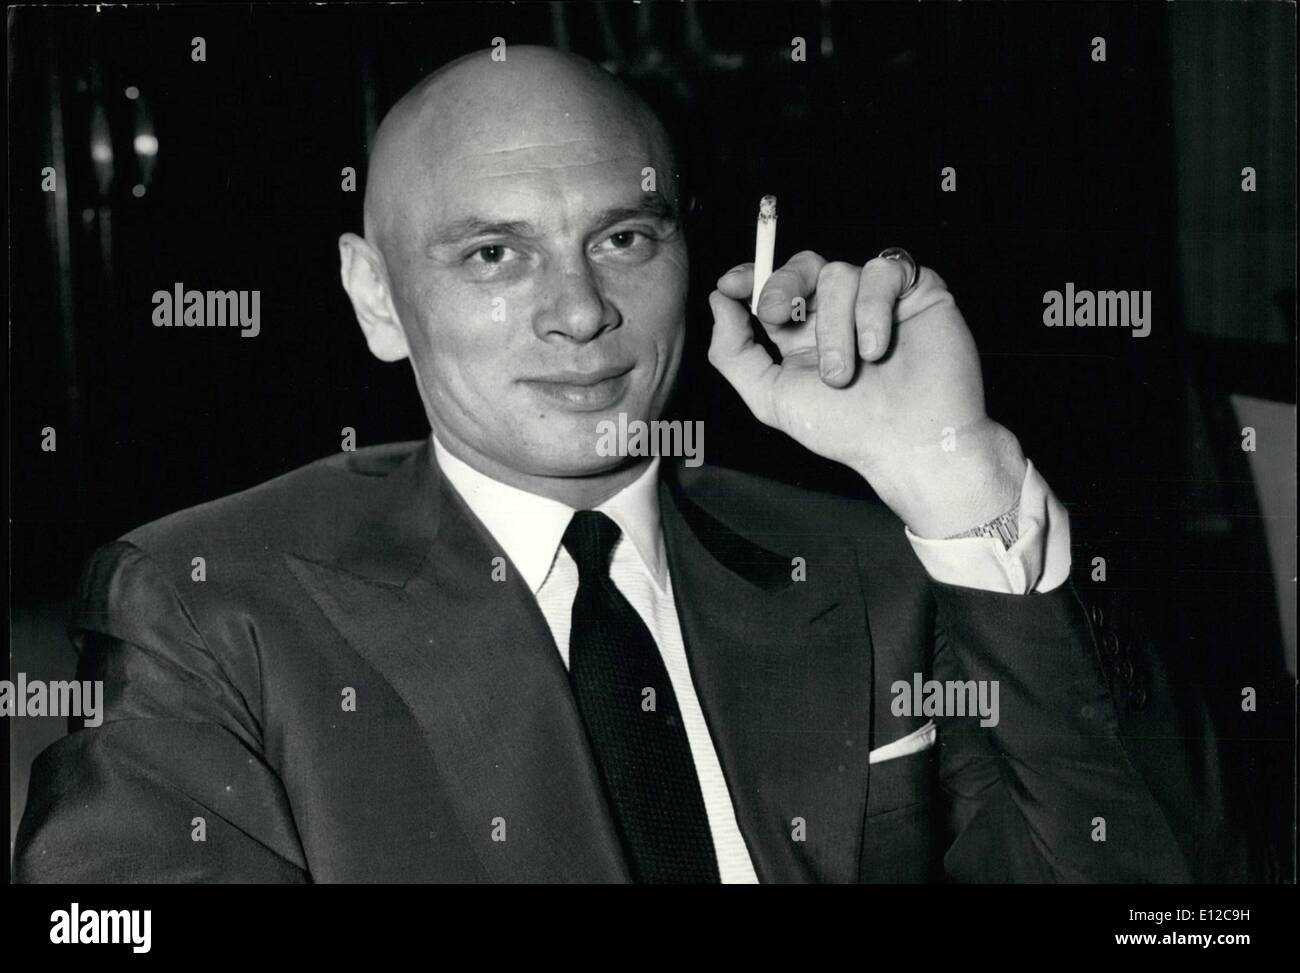 Dec. 16, 2011 - Yul Brynner in Paris. Yul Brynner who is co-starring with Charlton Heston in Cecile De Mille's Ten Commandments is now in Paris. OPS: Yul Brynner during his press conference at the Hotel Plaza Athenee, Paris this afternoon. Feb. 19/58 Stock Photo